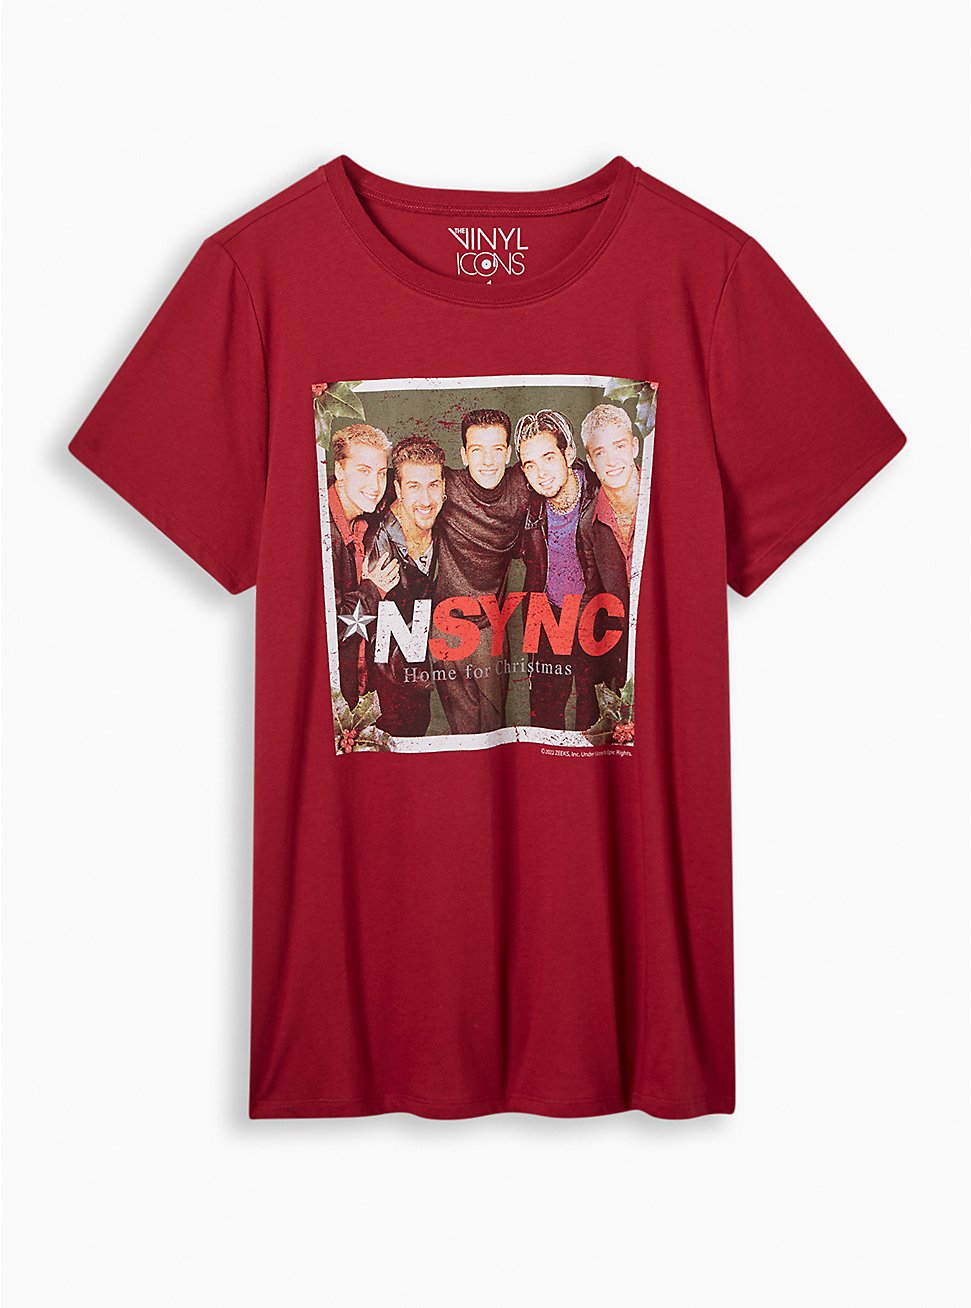 Nysync Christmas Crew Neck Tee , JESTER RED, hi-res